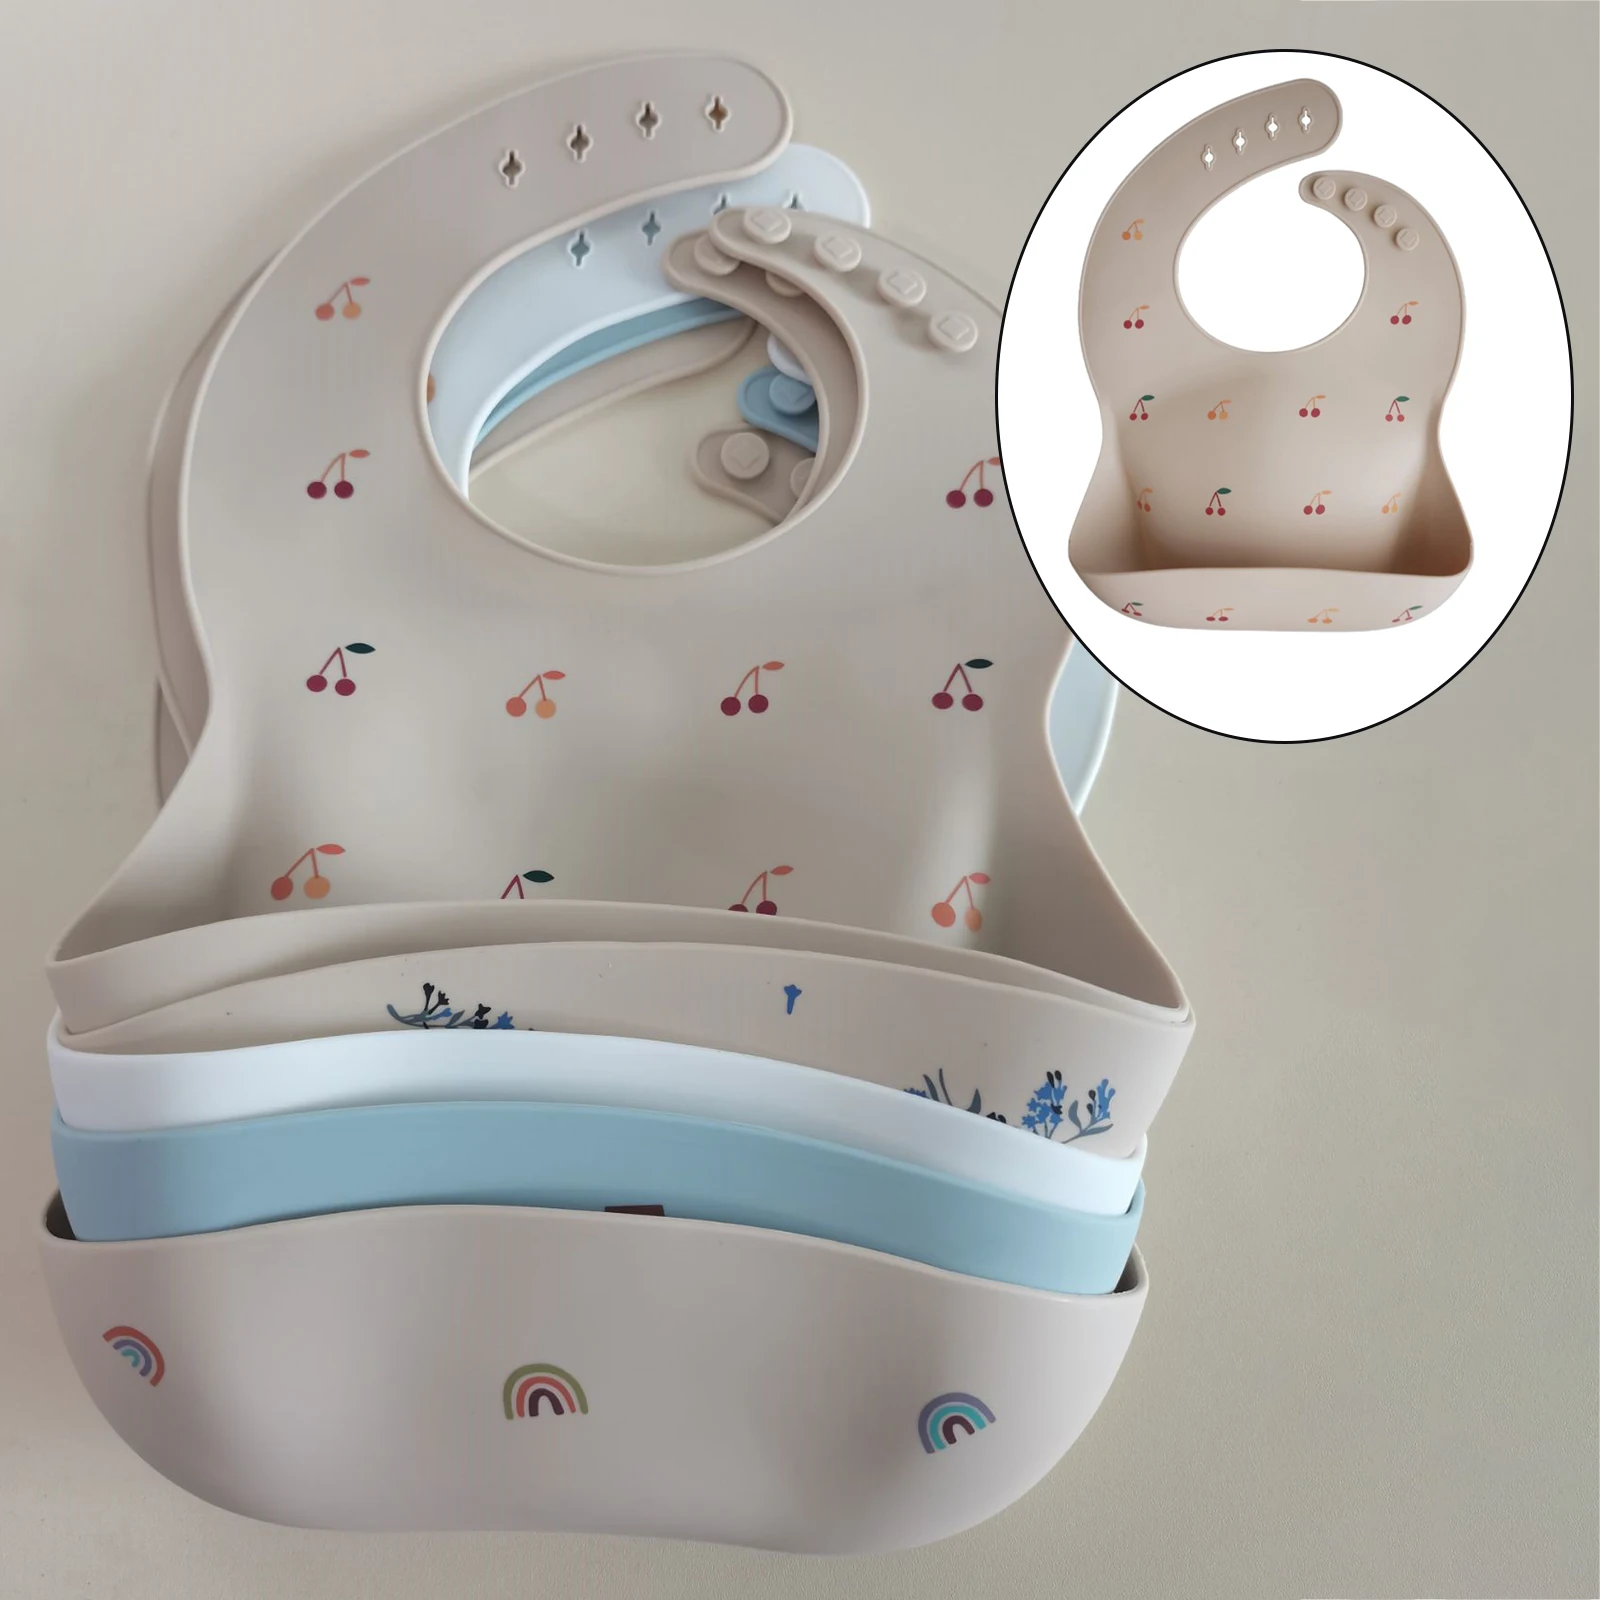 Silicone Baby Bibs BPA Free Waterproof Soft Durable Adjustable Silicone Bibs for Babies & Toddlers